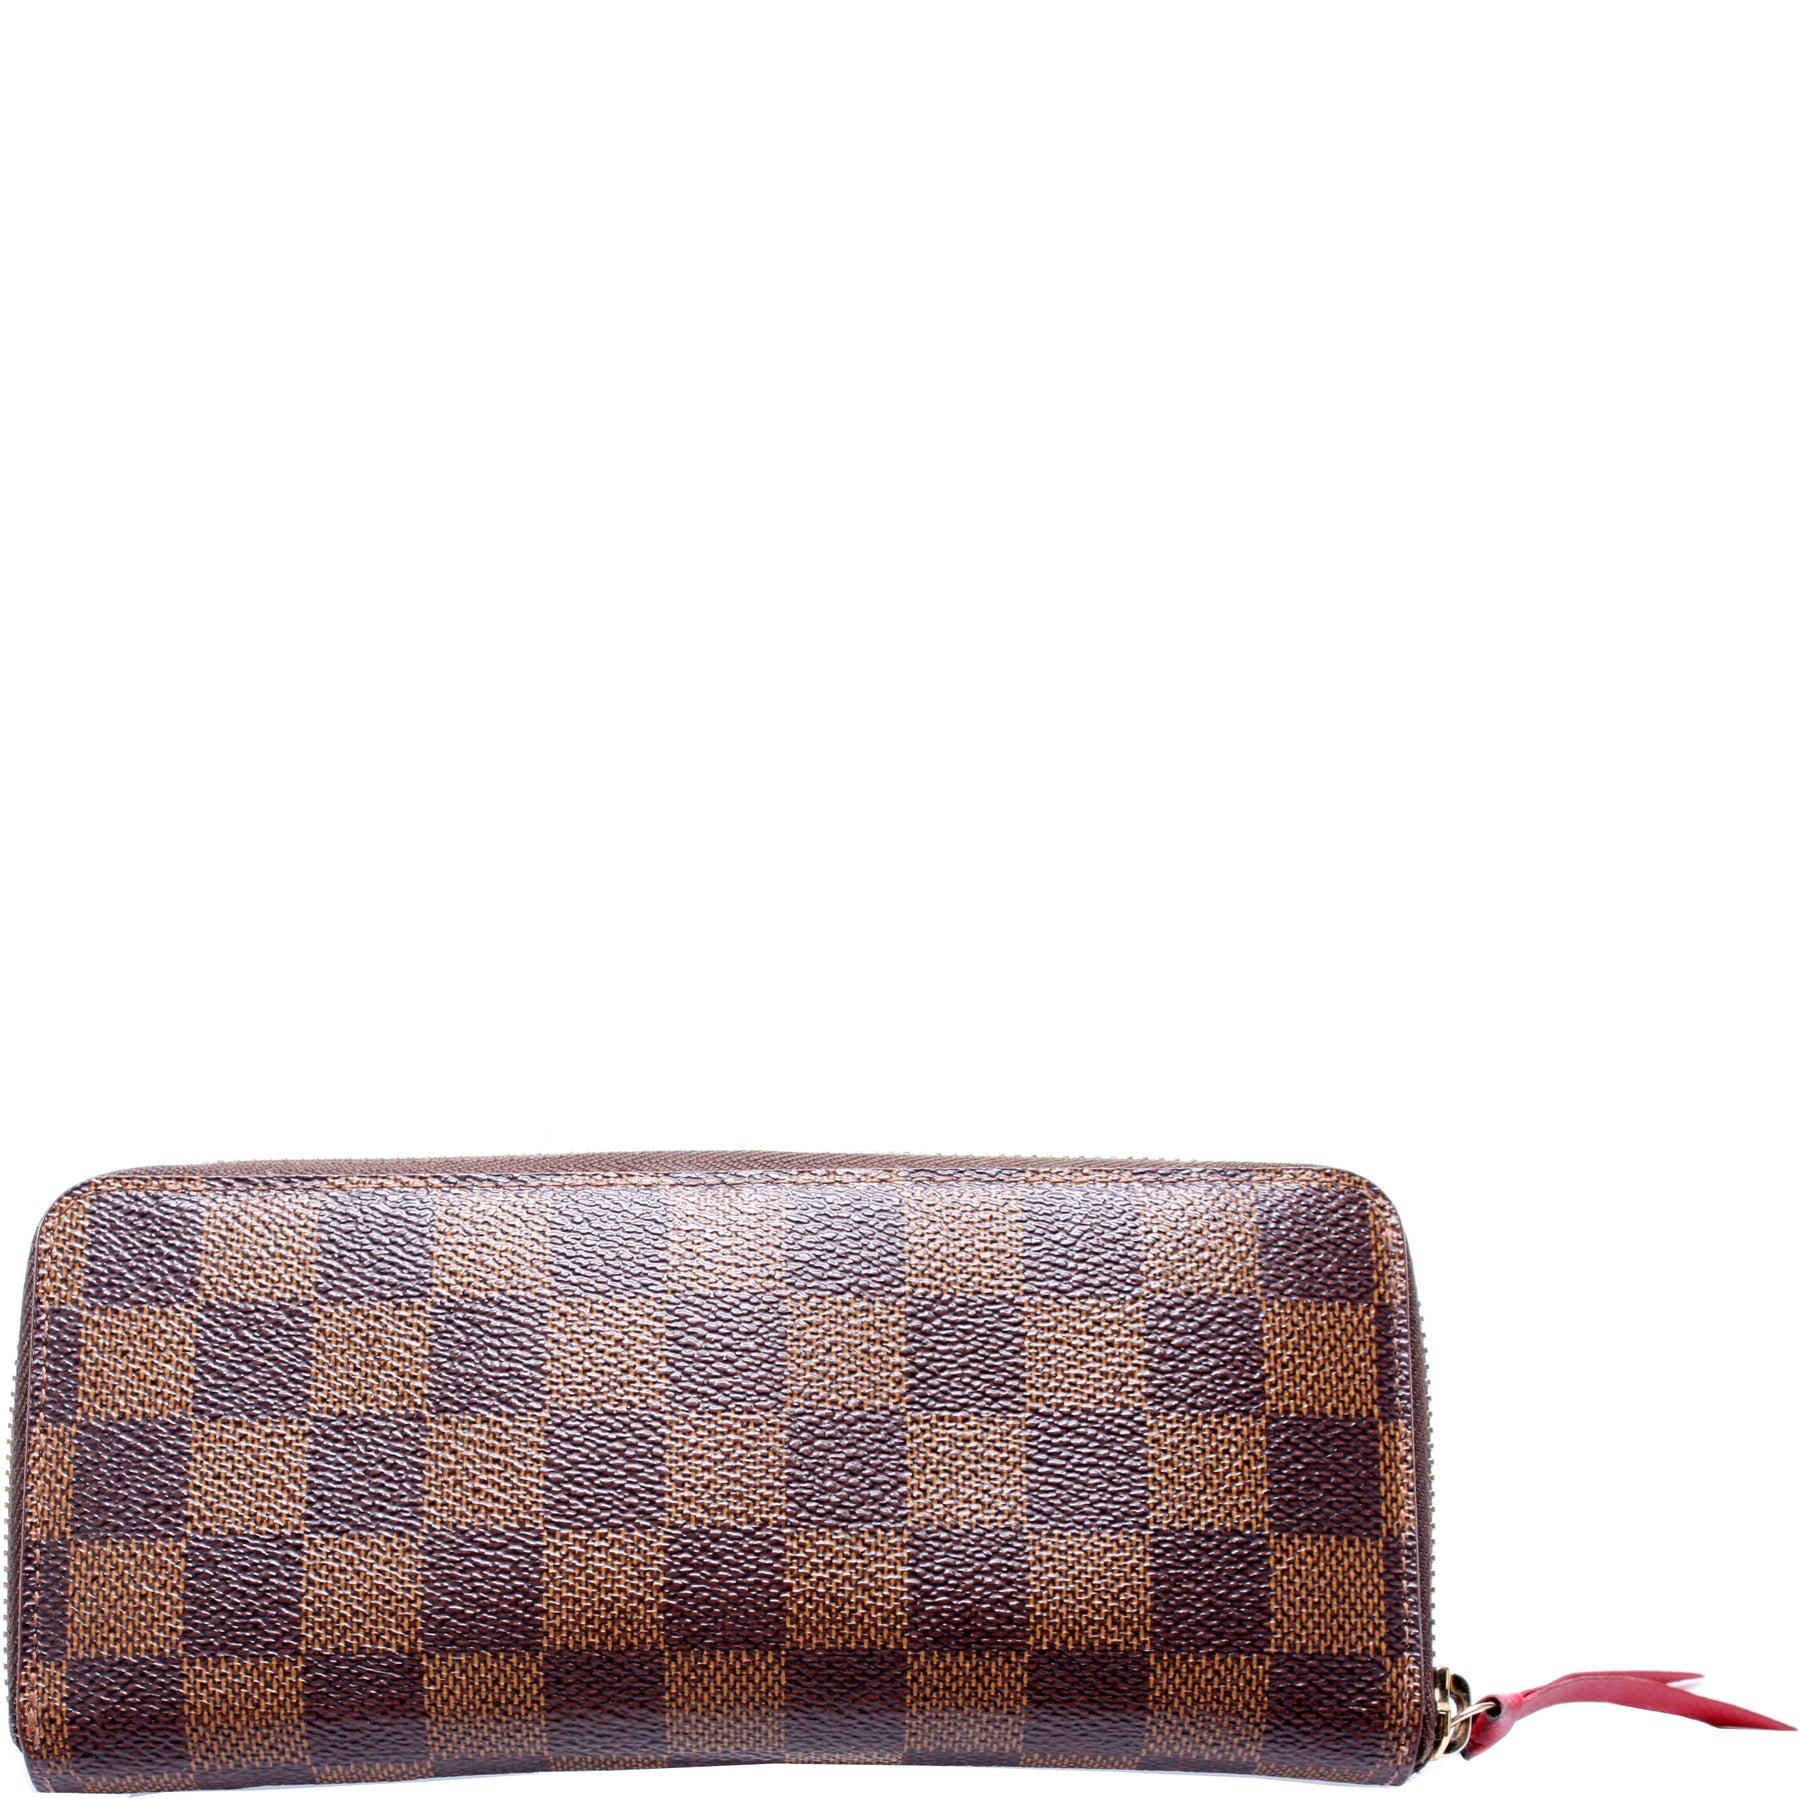 How to Spot Authentic Louis Vuitton Clemence Damier Azur Wallet and Where  to Find the Date Code 